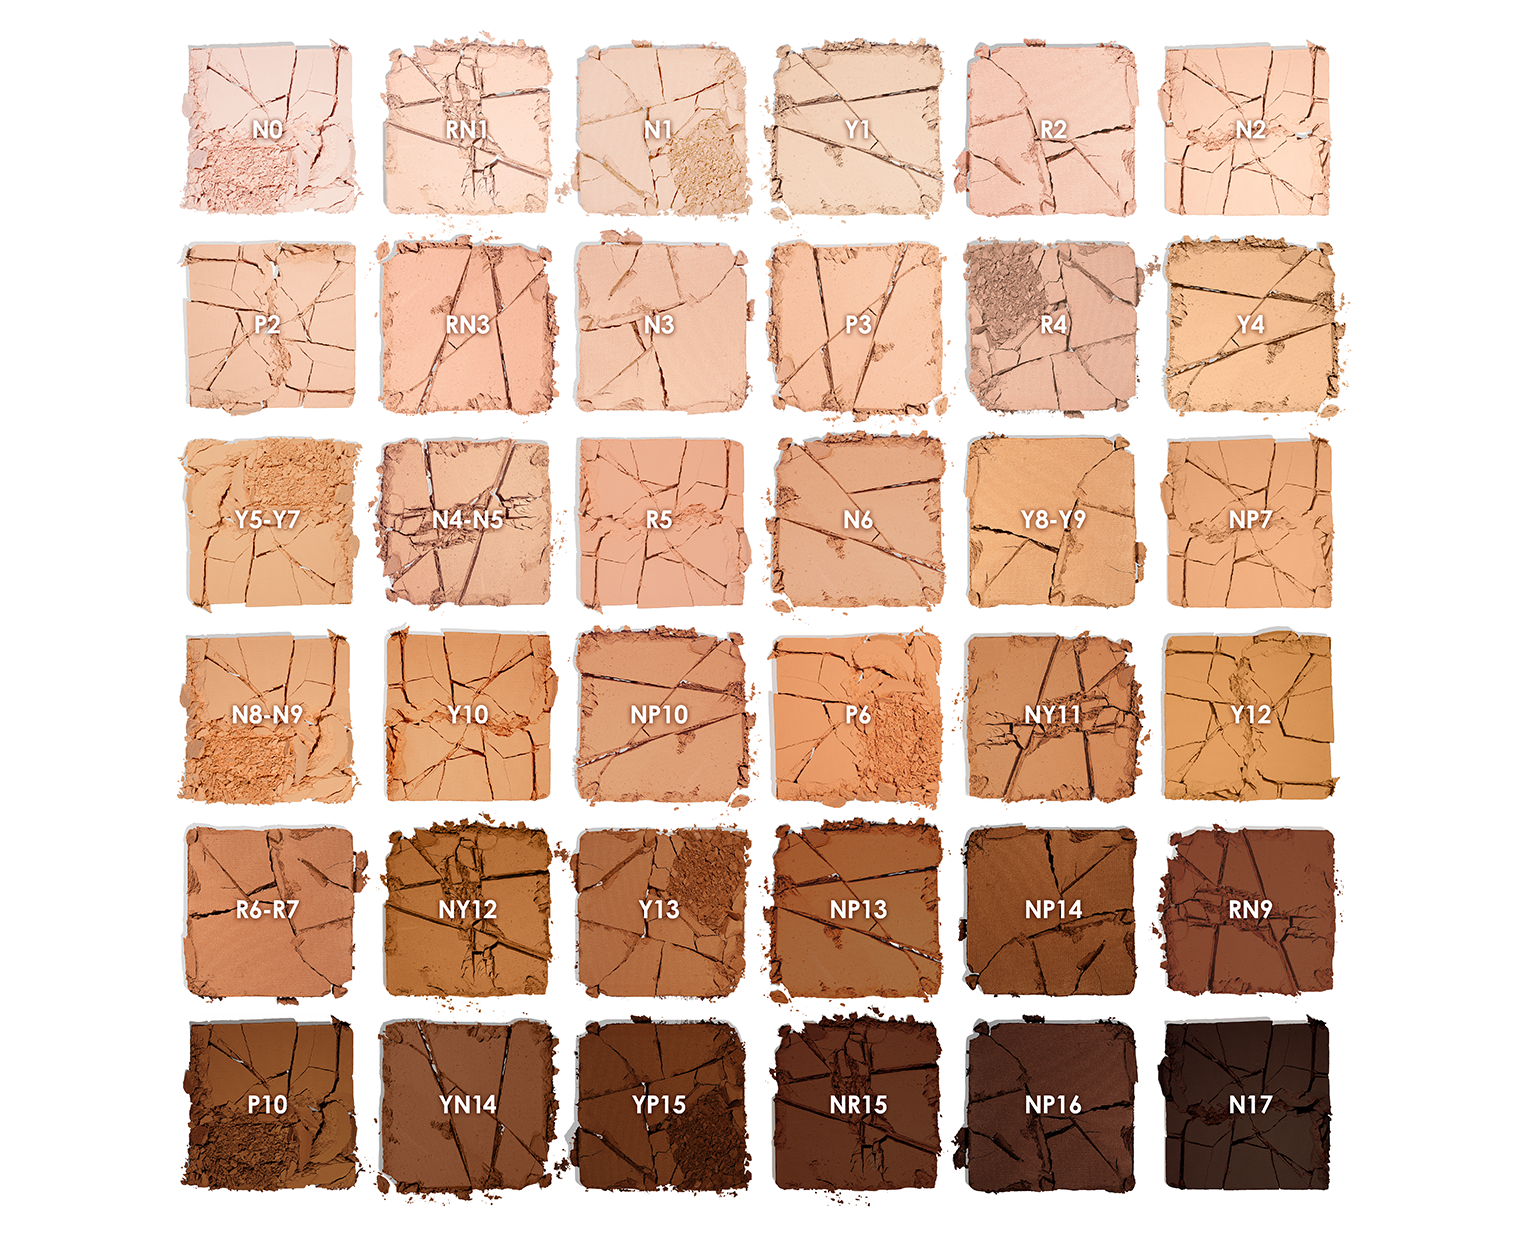 Hy-Glam_Powder-Foundation_Smears-Composition_1520x1240_Option.png